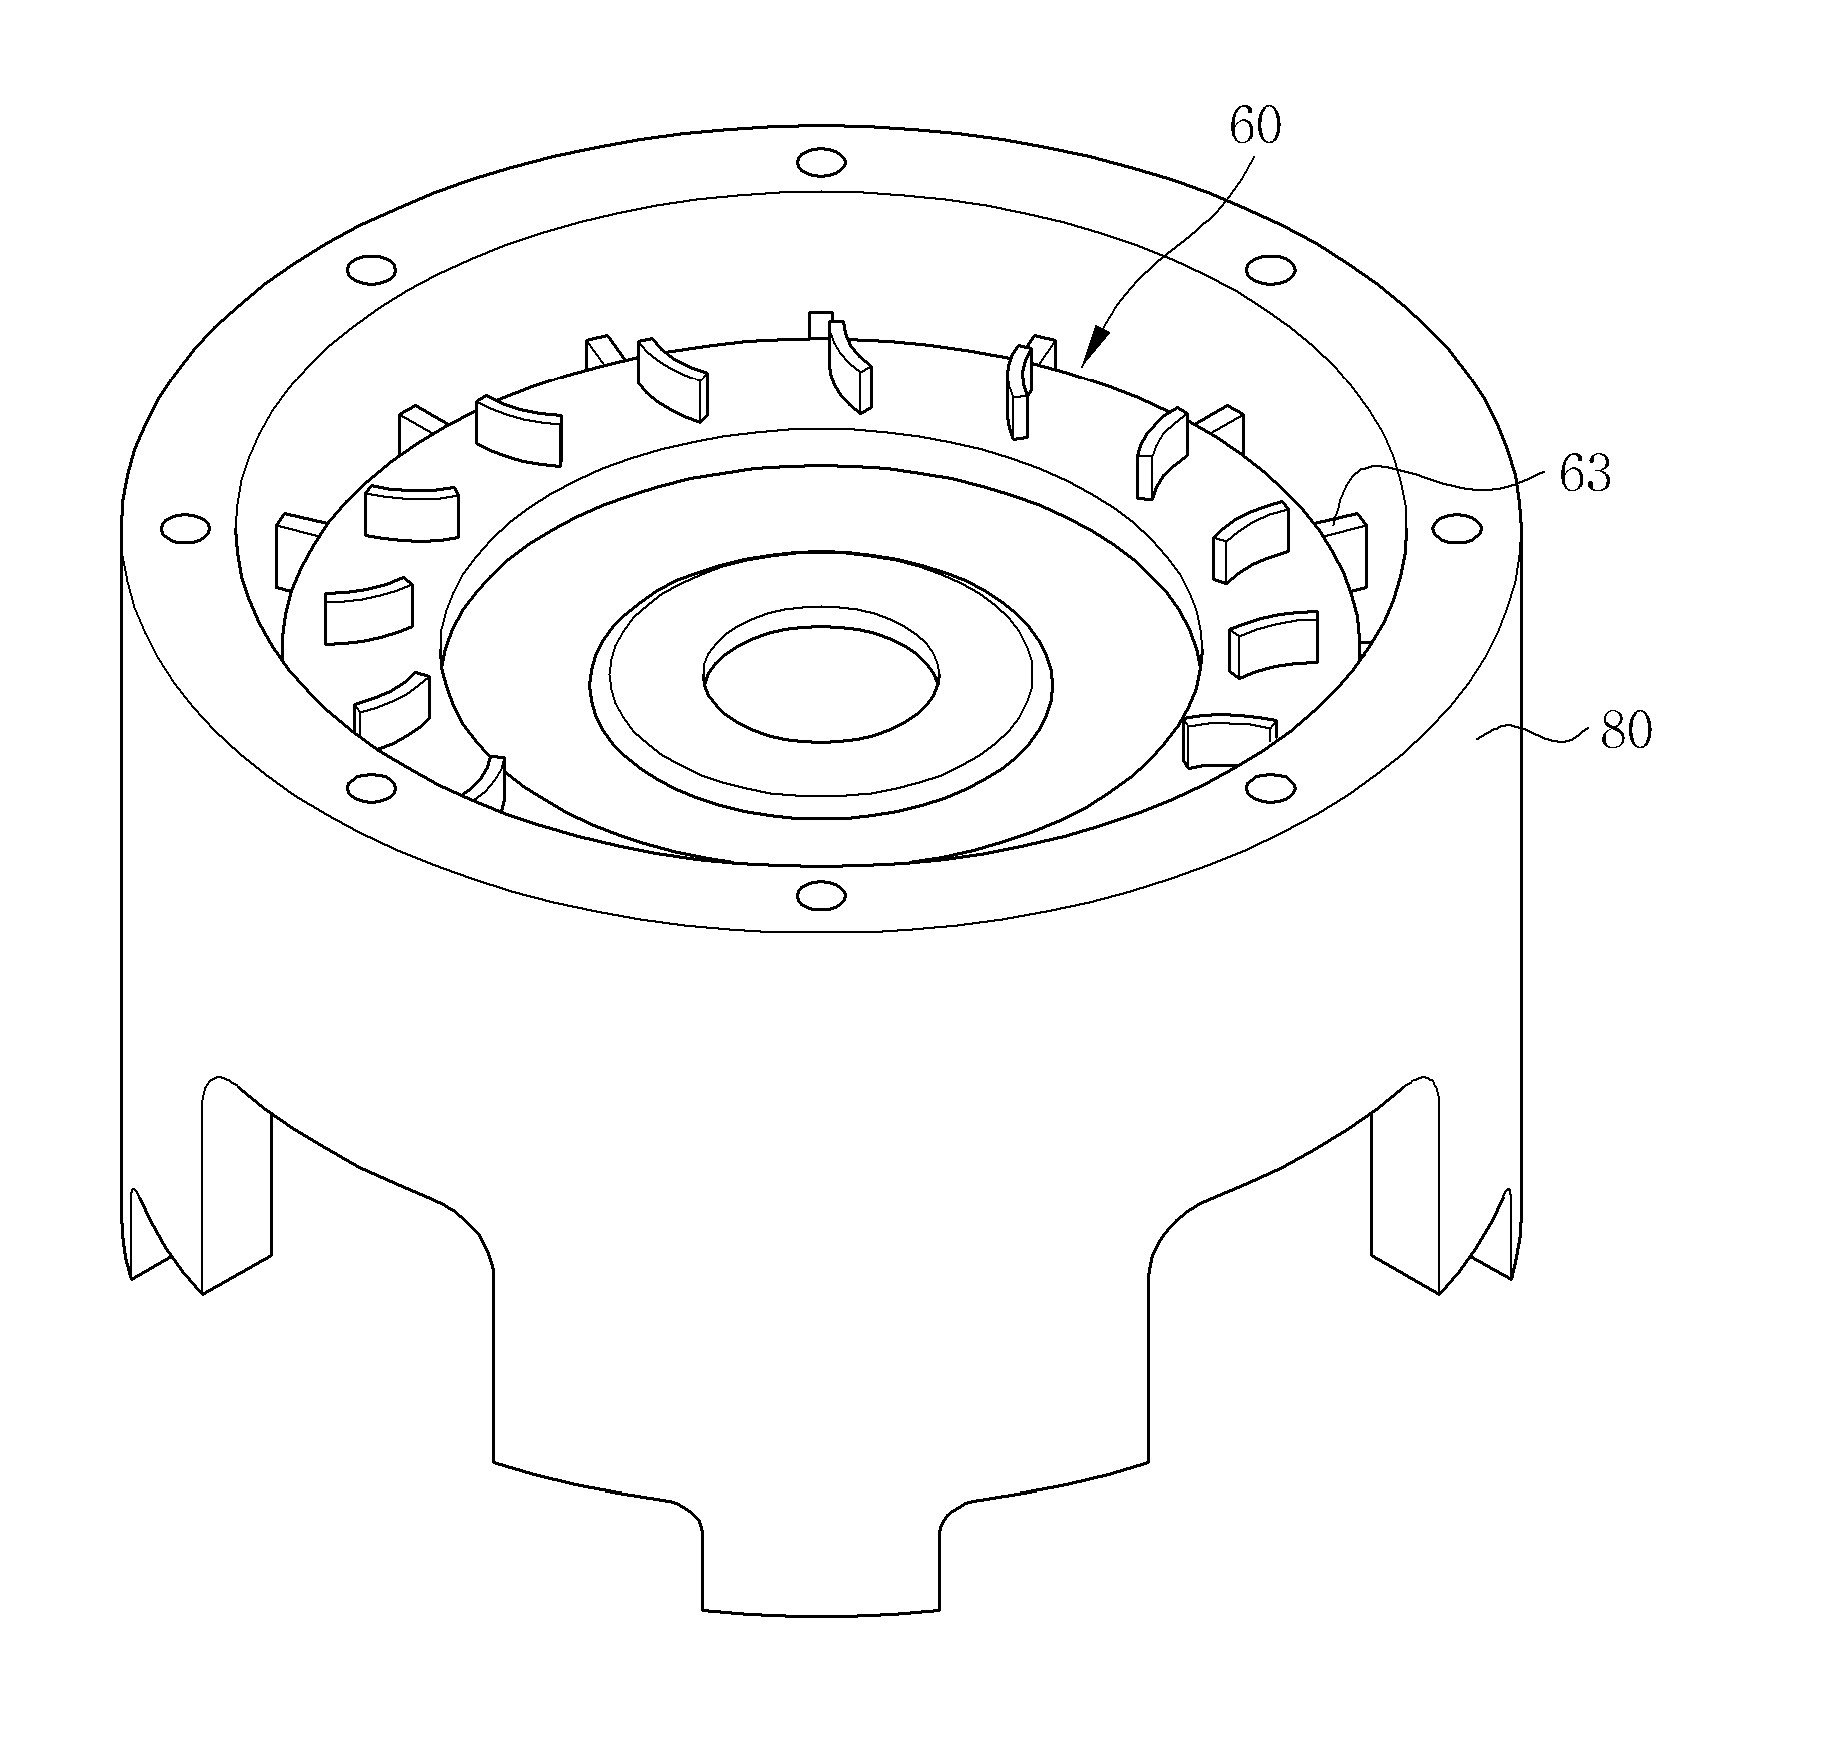 Switched reluctance motor assembly